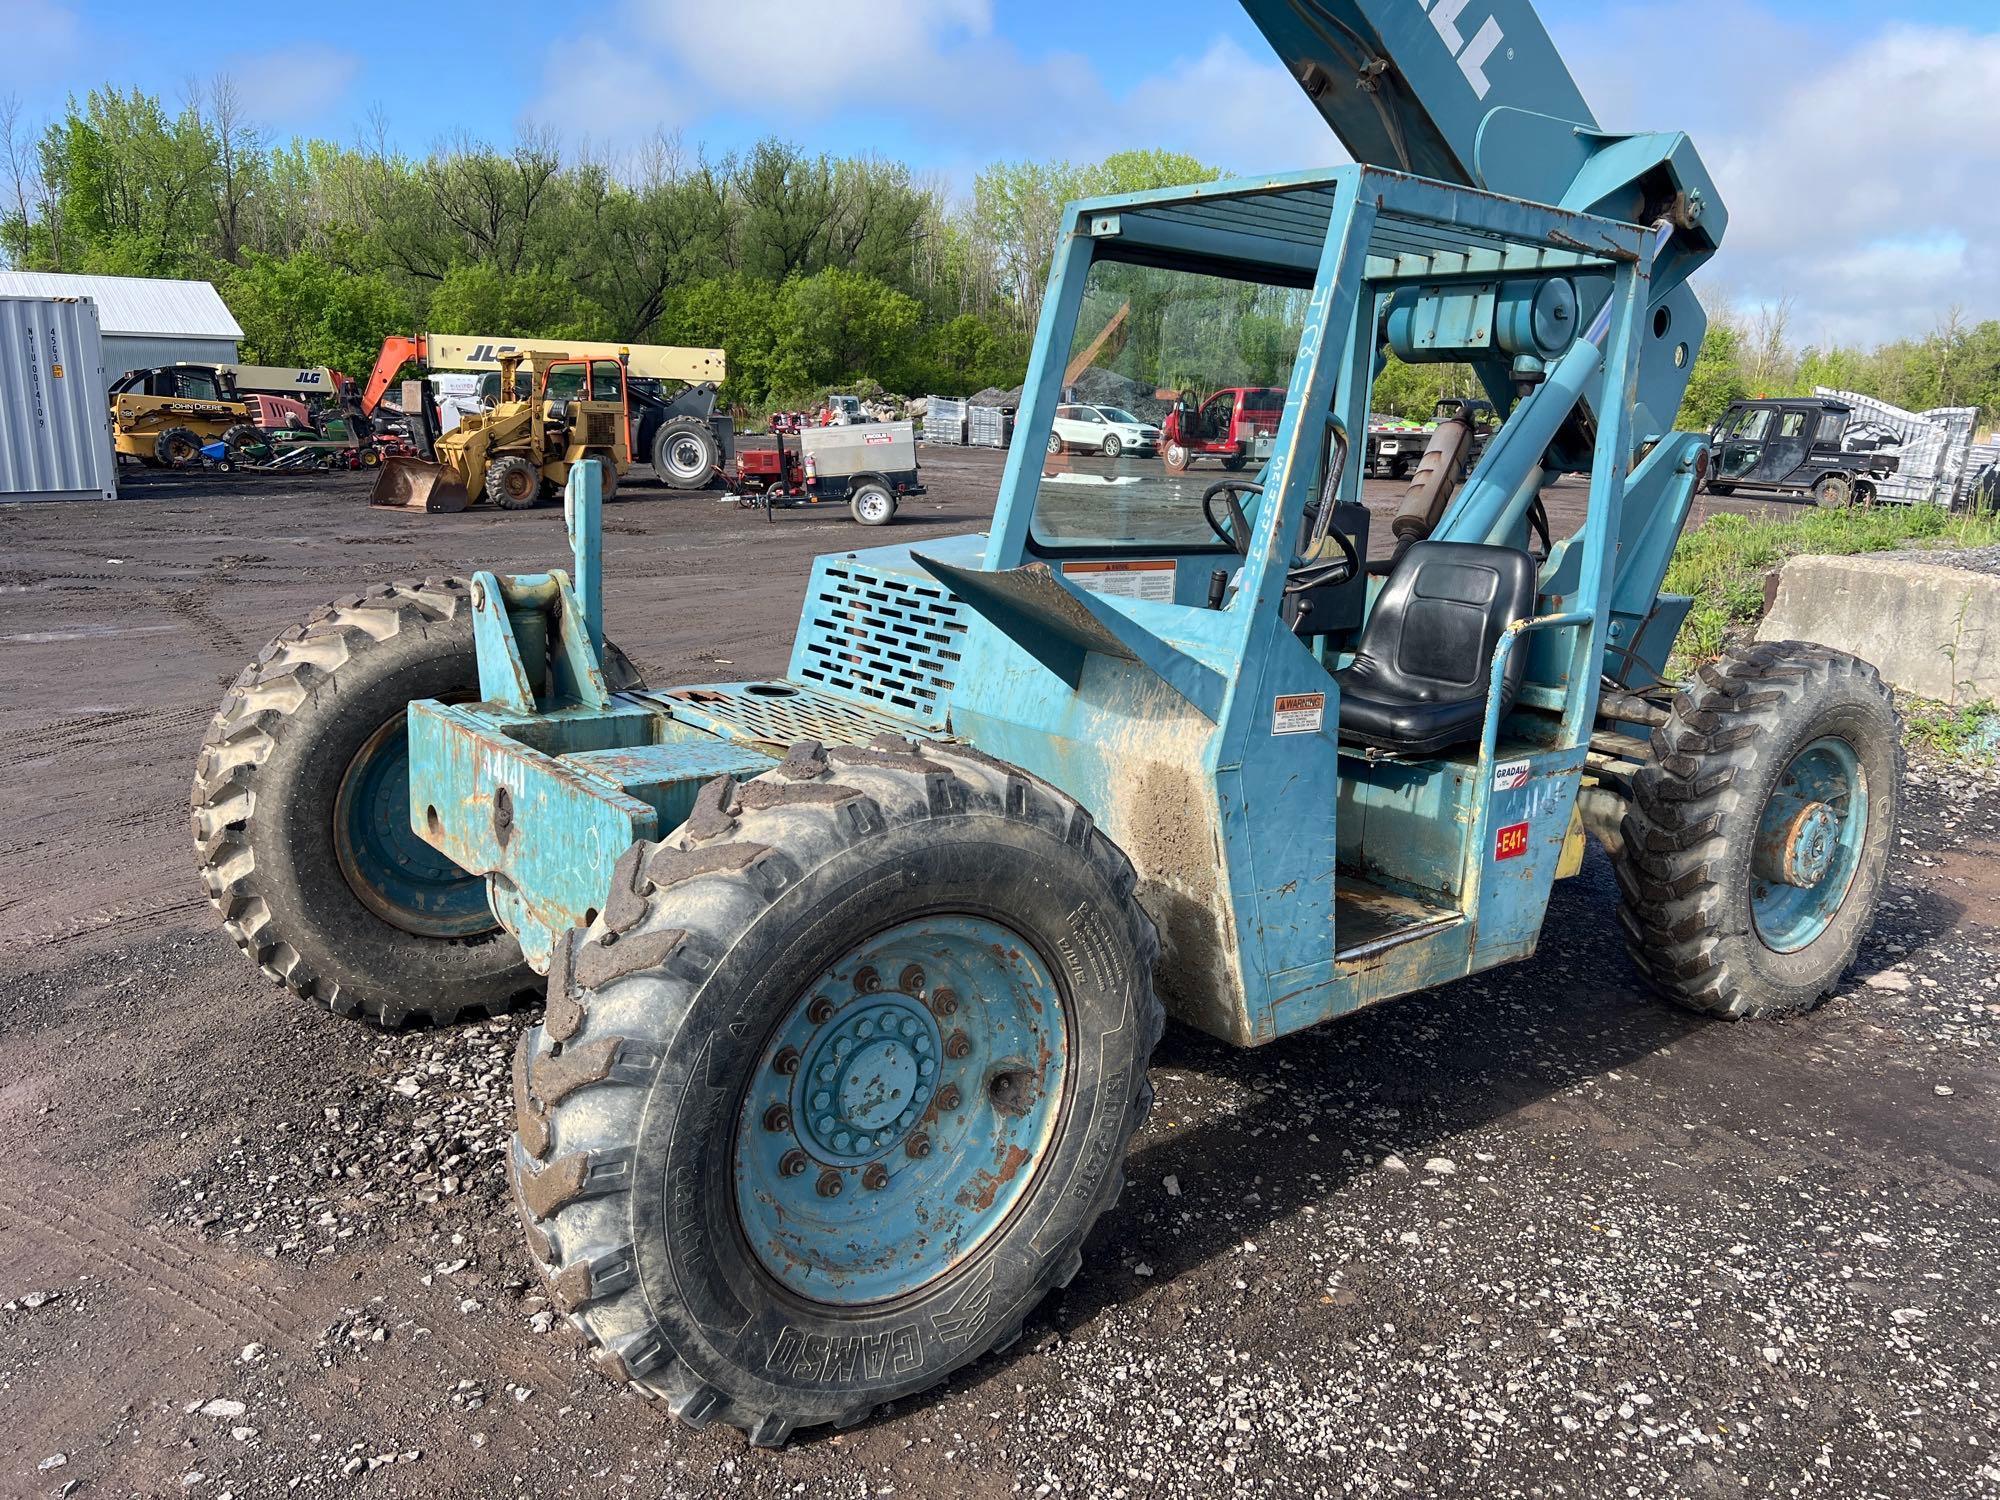 GRADALL 534C-9 TELESCOPIC FORKLIFT SN-444141 4x4, powered by diesel engine, equipped with OROPS,